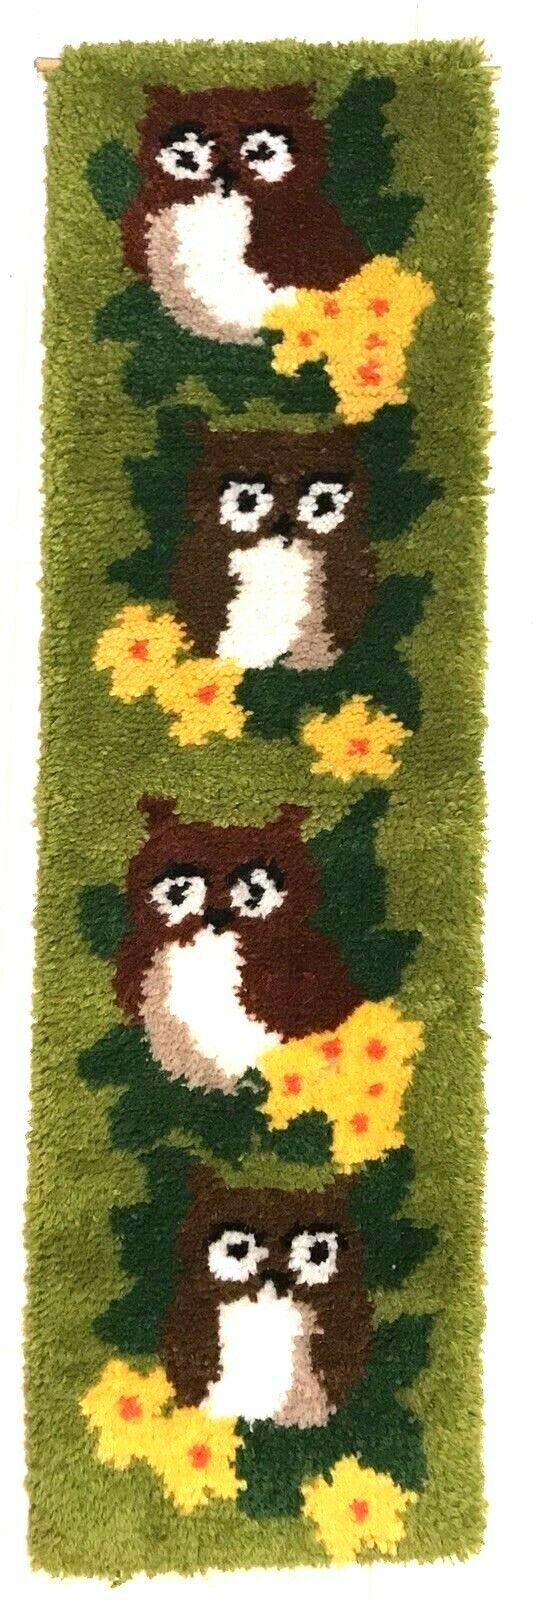 70s Owl Retro Latch Hook Rug Wall Hanging 46 x 13 Completed Retro 70s colors